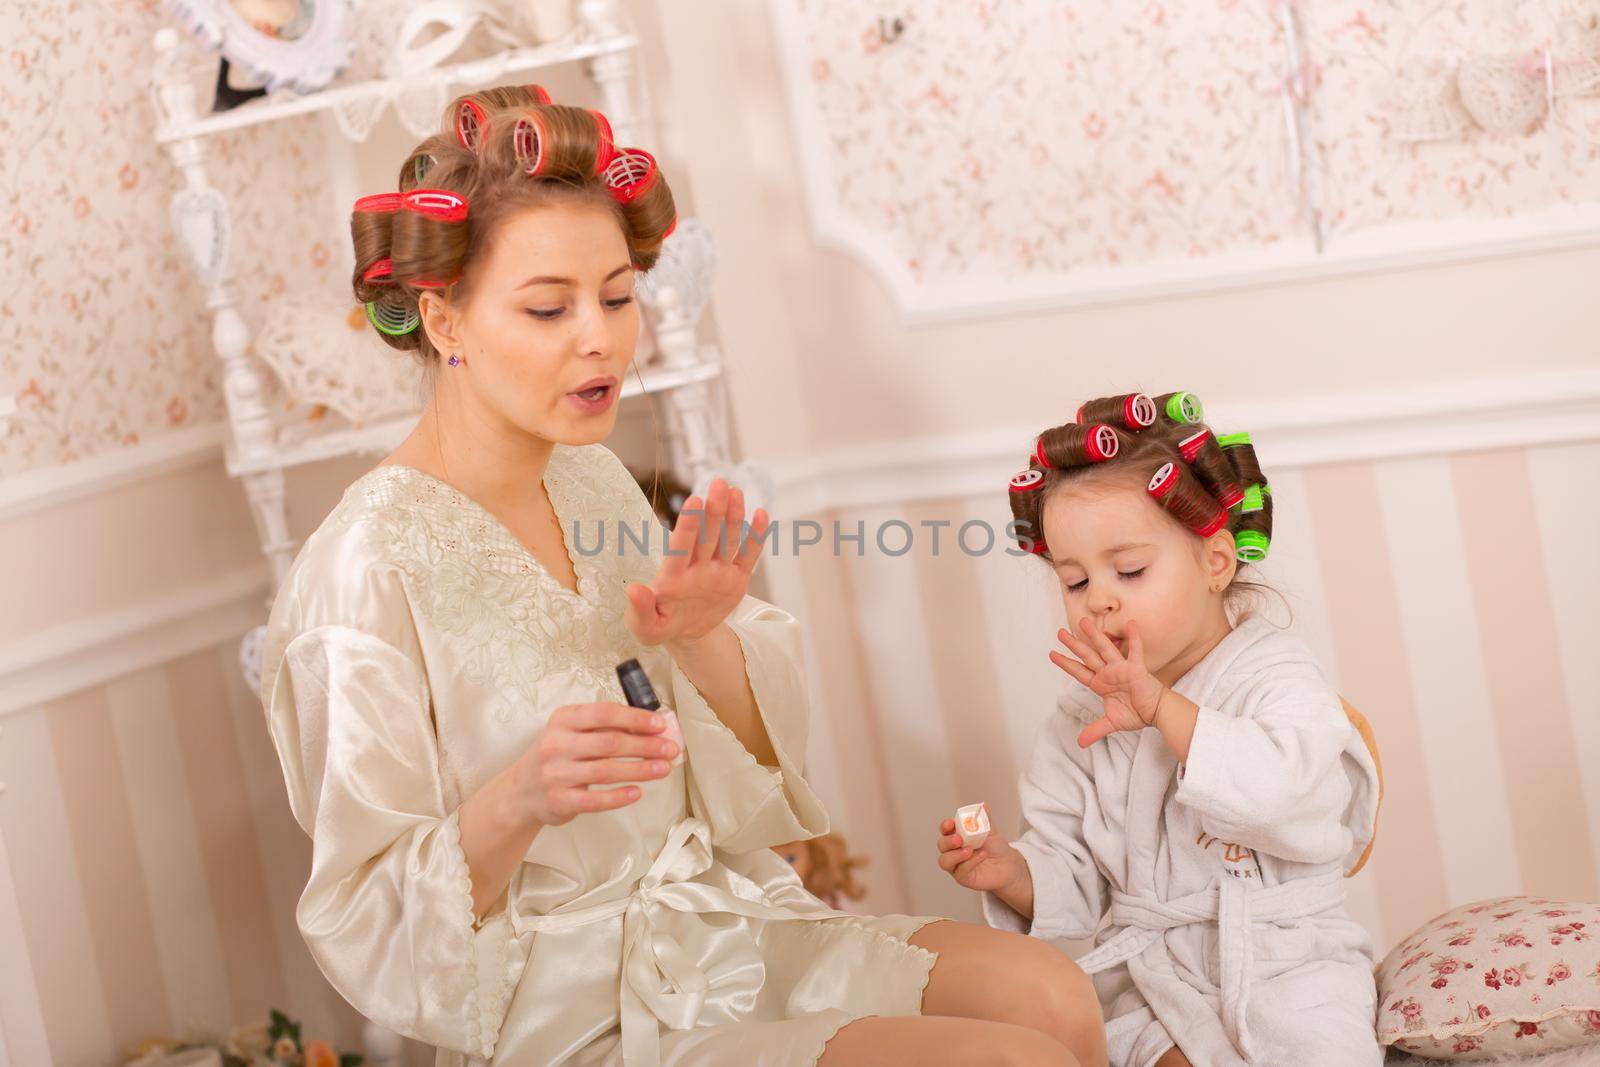 Adorable little girl with her mother in curlers paint their fingernails. Copies mom's behavior. Mom teaches her daughter to take care of herself. Beauty day by Try_my_best